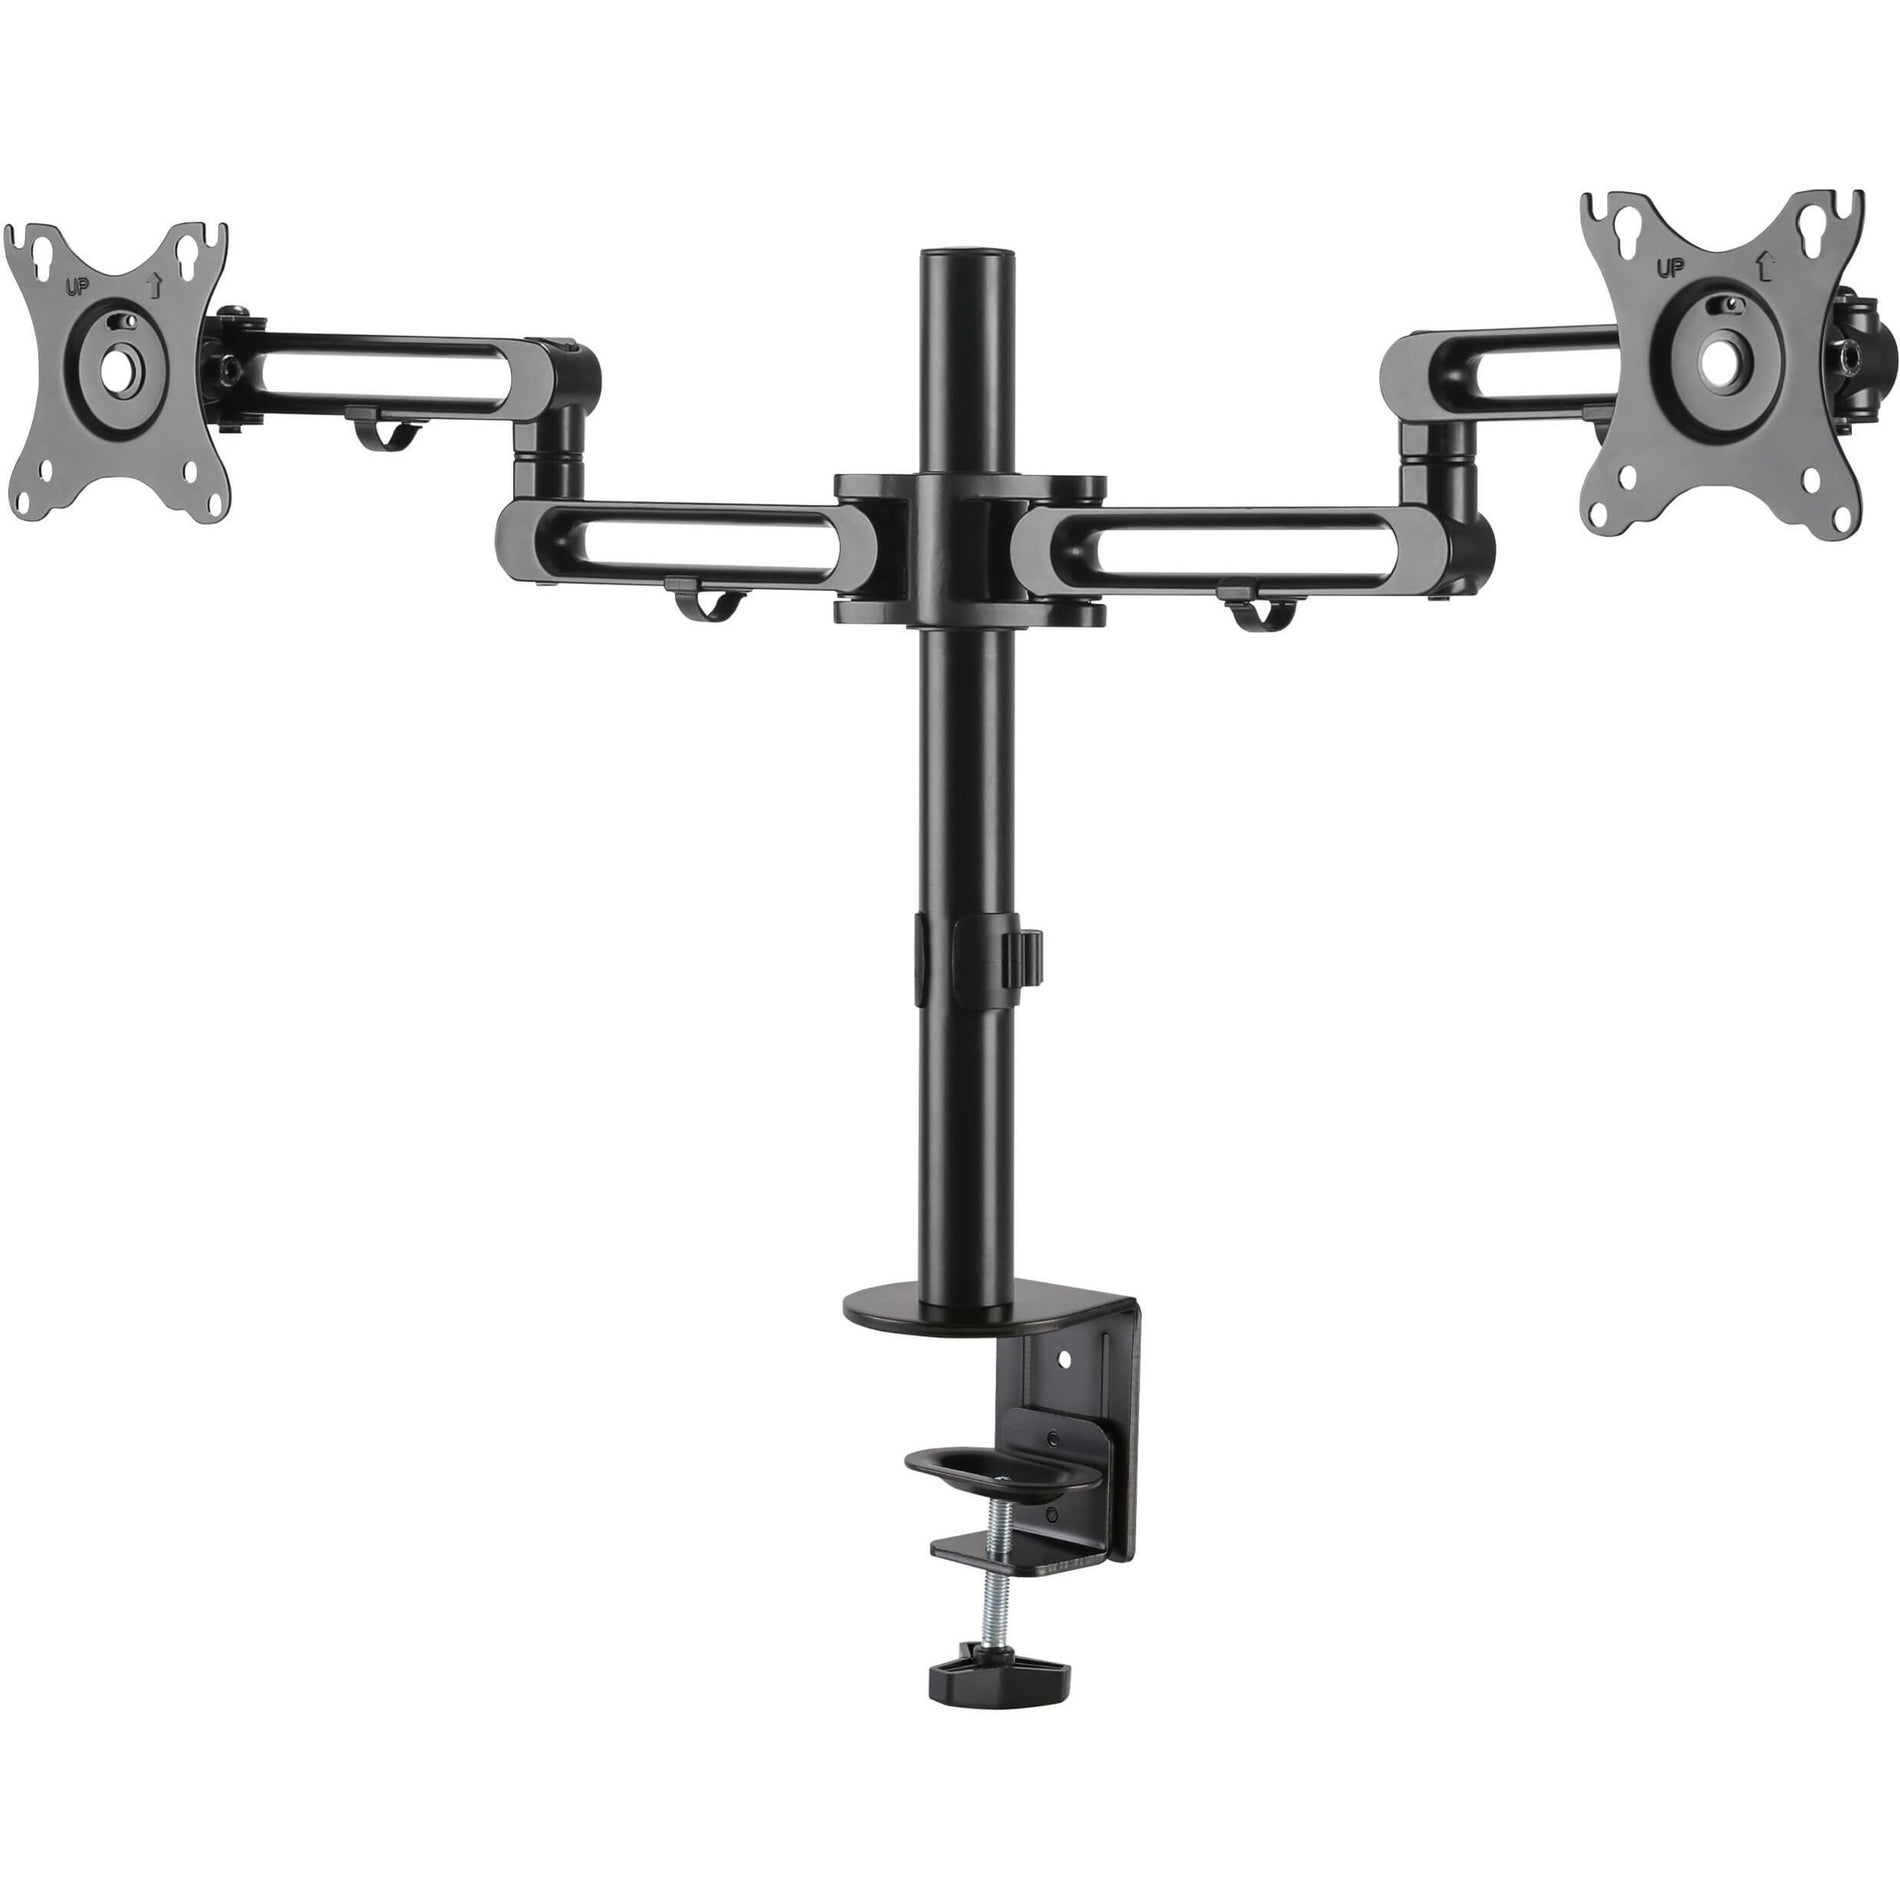 Tripp Lite DDR1327SDFC-1 Dual-Monitor Flex-Arm Desktop Clamp for 13" to 27" Displays, Reduced Glare, Cable Management, Swivel, Tilt, Rotate, Durable, Ergonomic